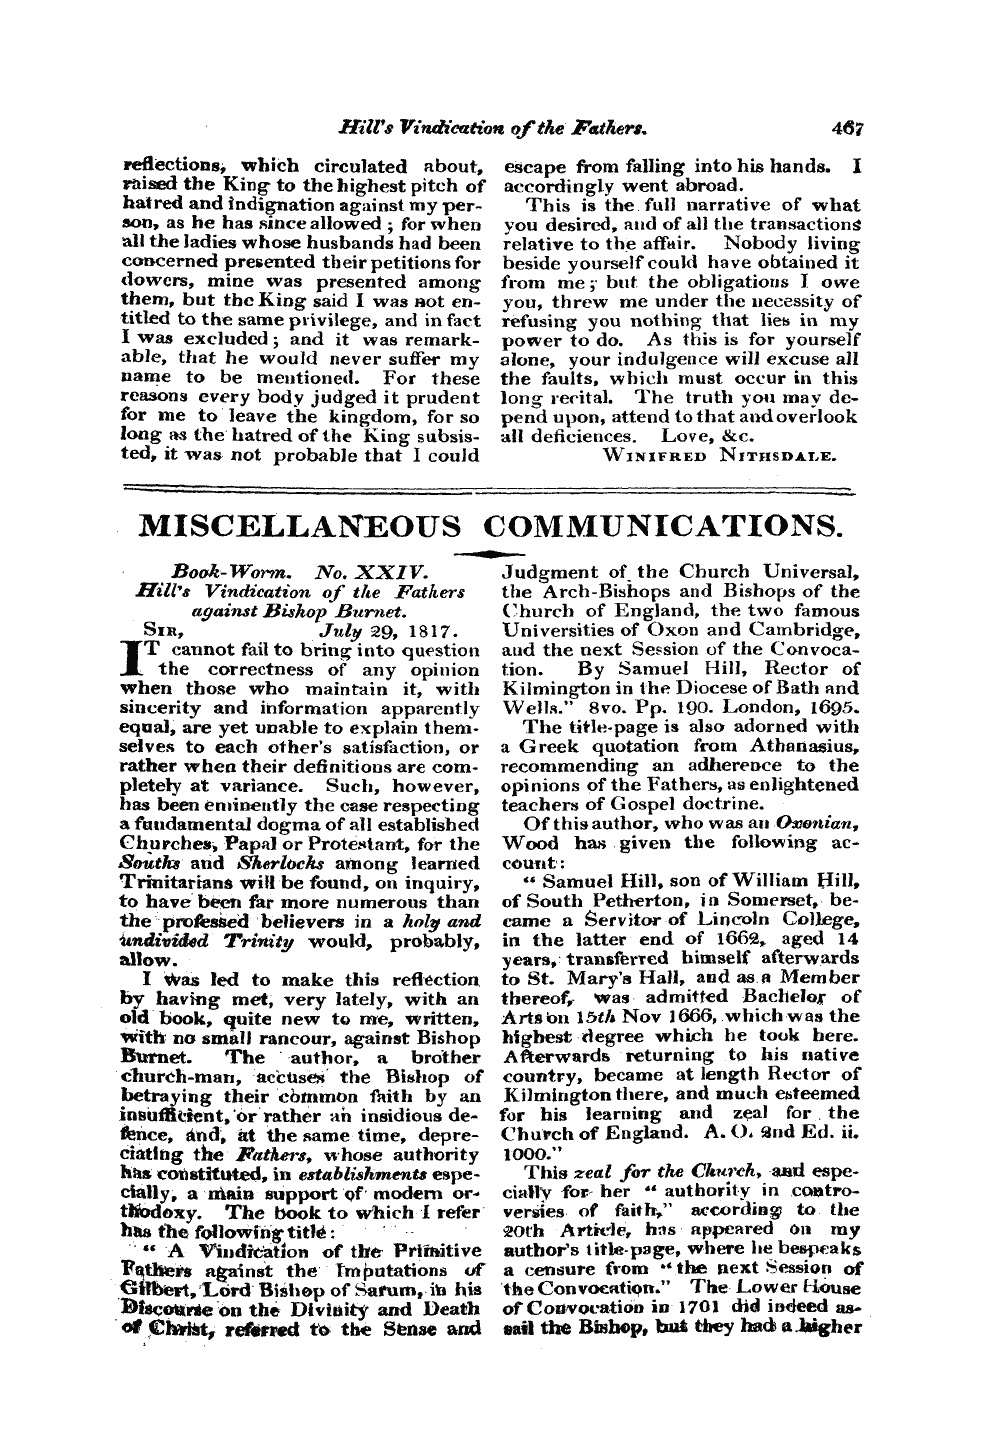 Monthly Repository (1806-1838) and Unitarian Chronicle (1832-1833): F Y, 1st edition - Miscellaneous Communications.